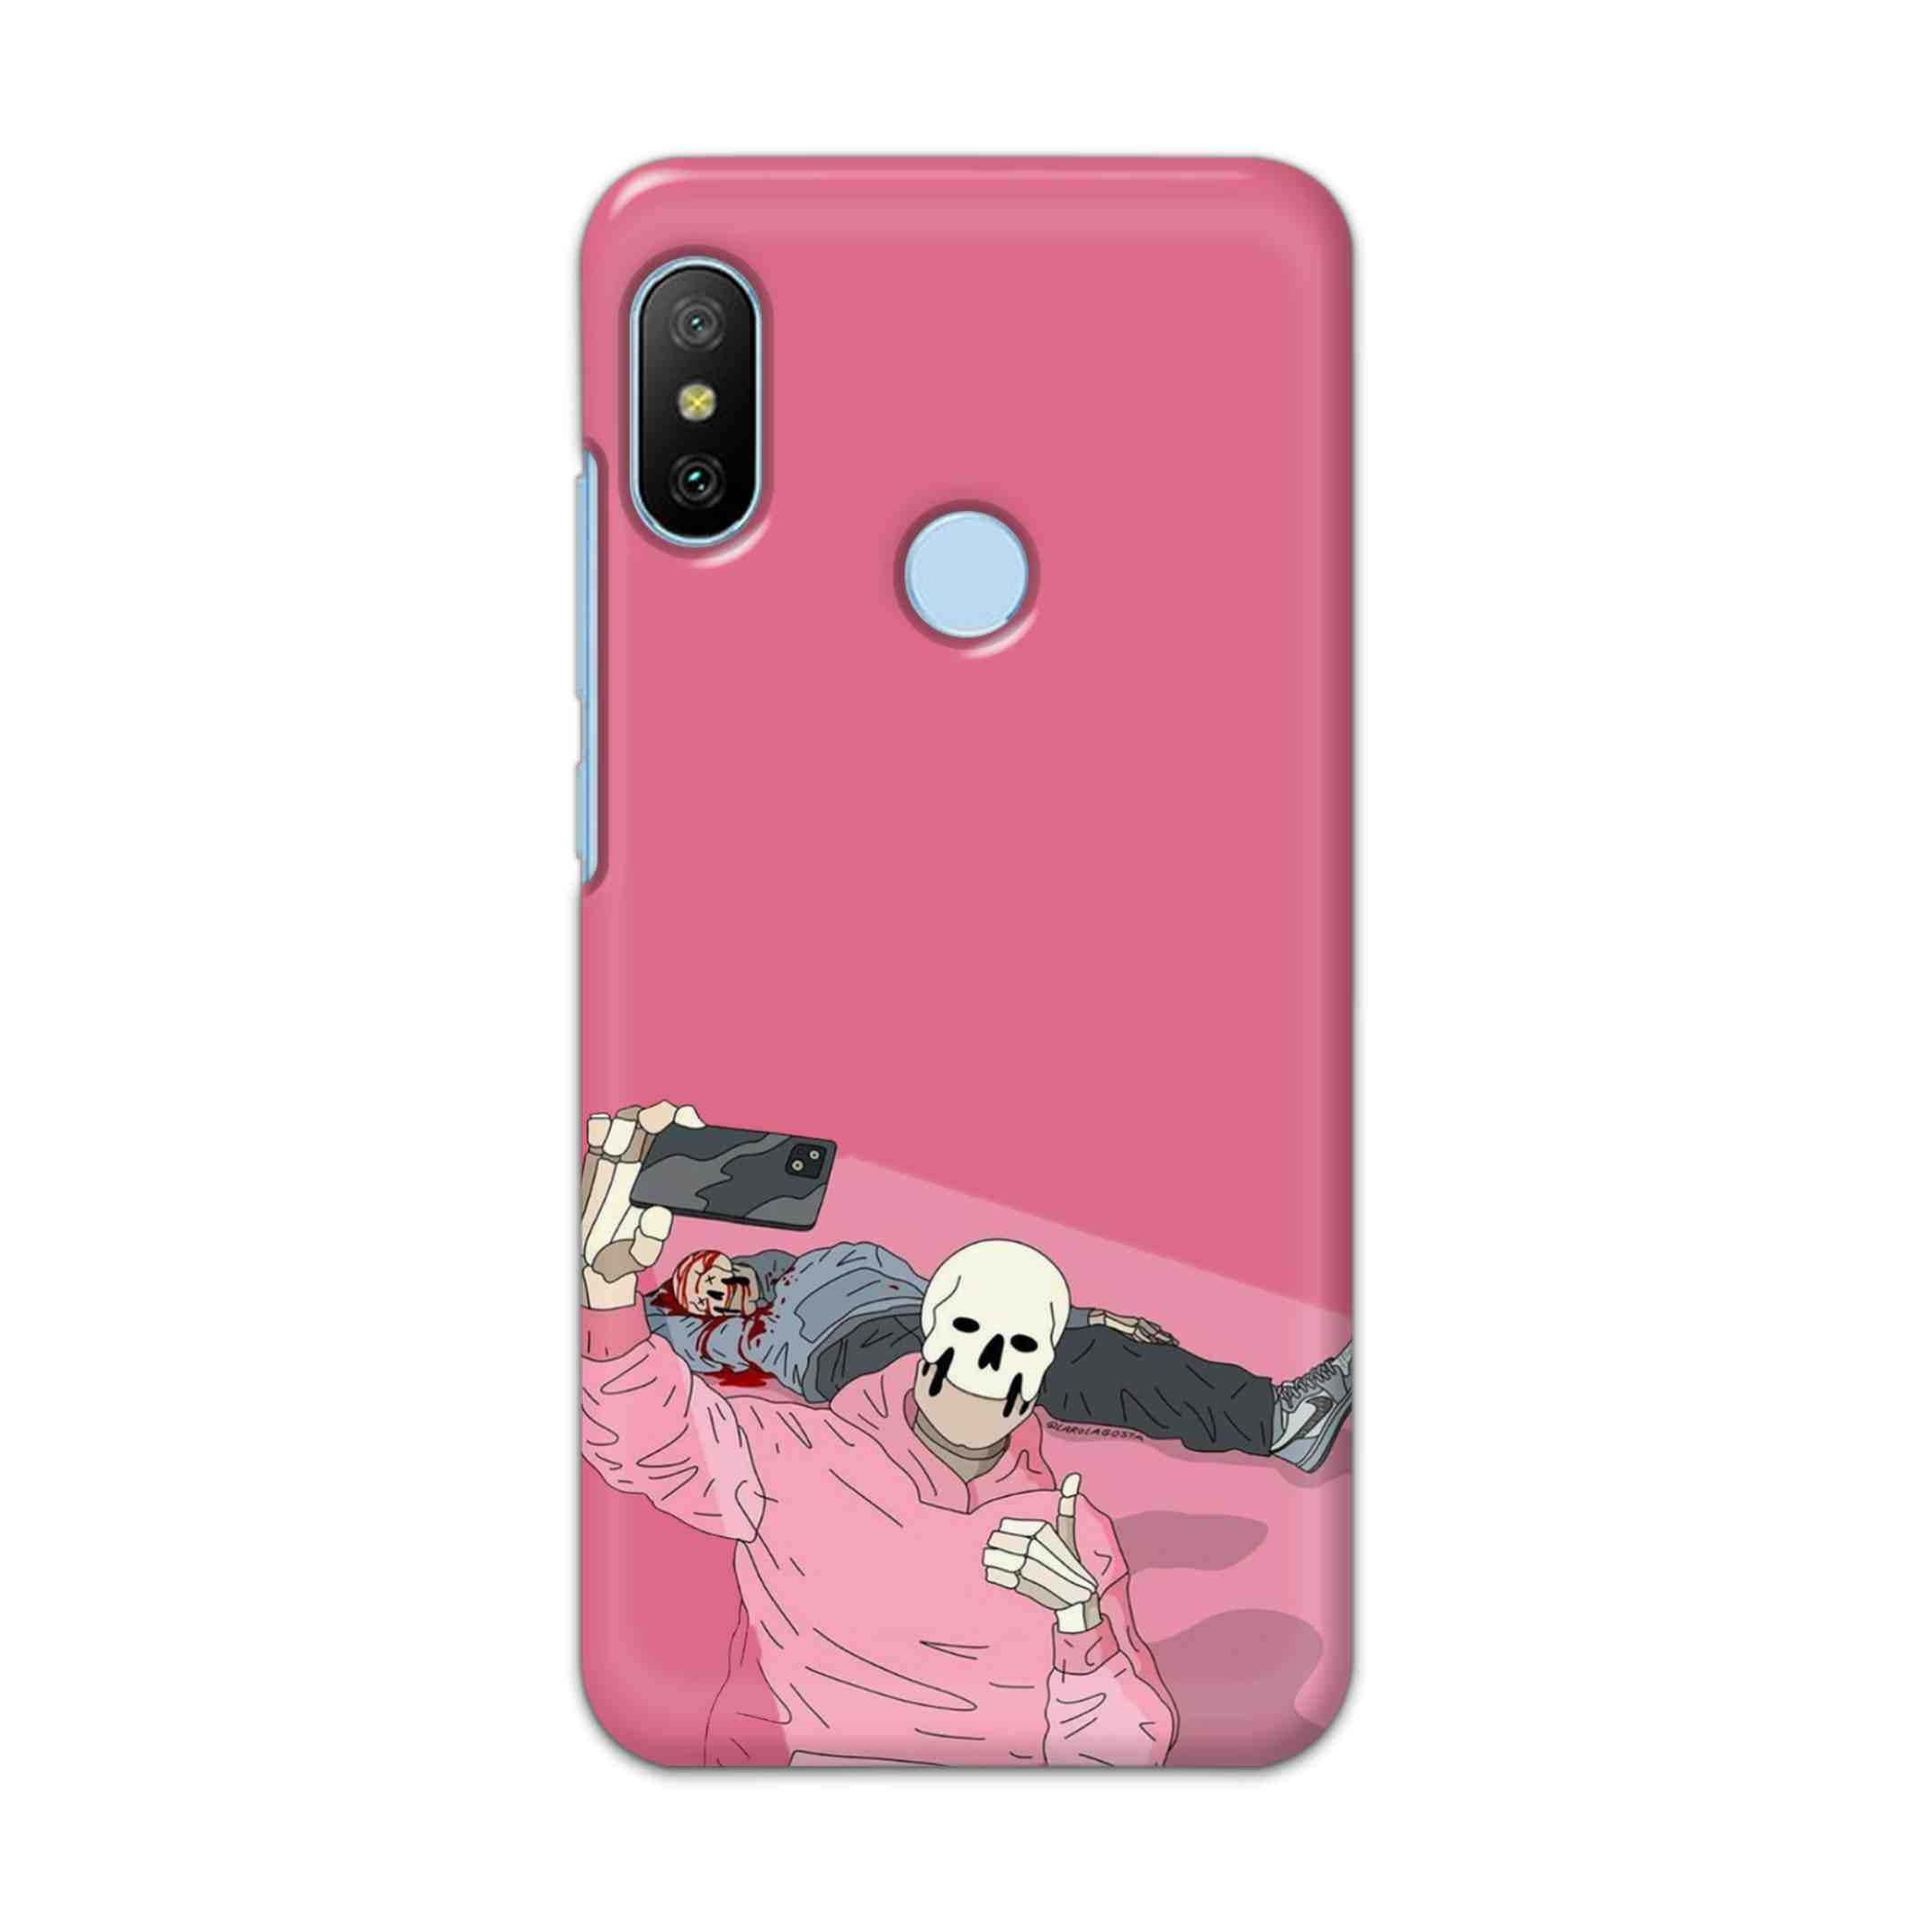 Buy Selfie Hard Back Mobile Phone Case/Cover For Xiaomi Redmi 6 Pro Online